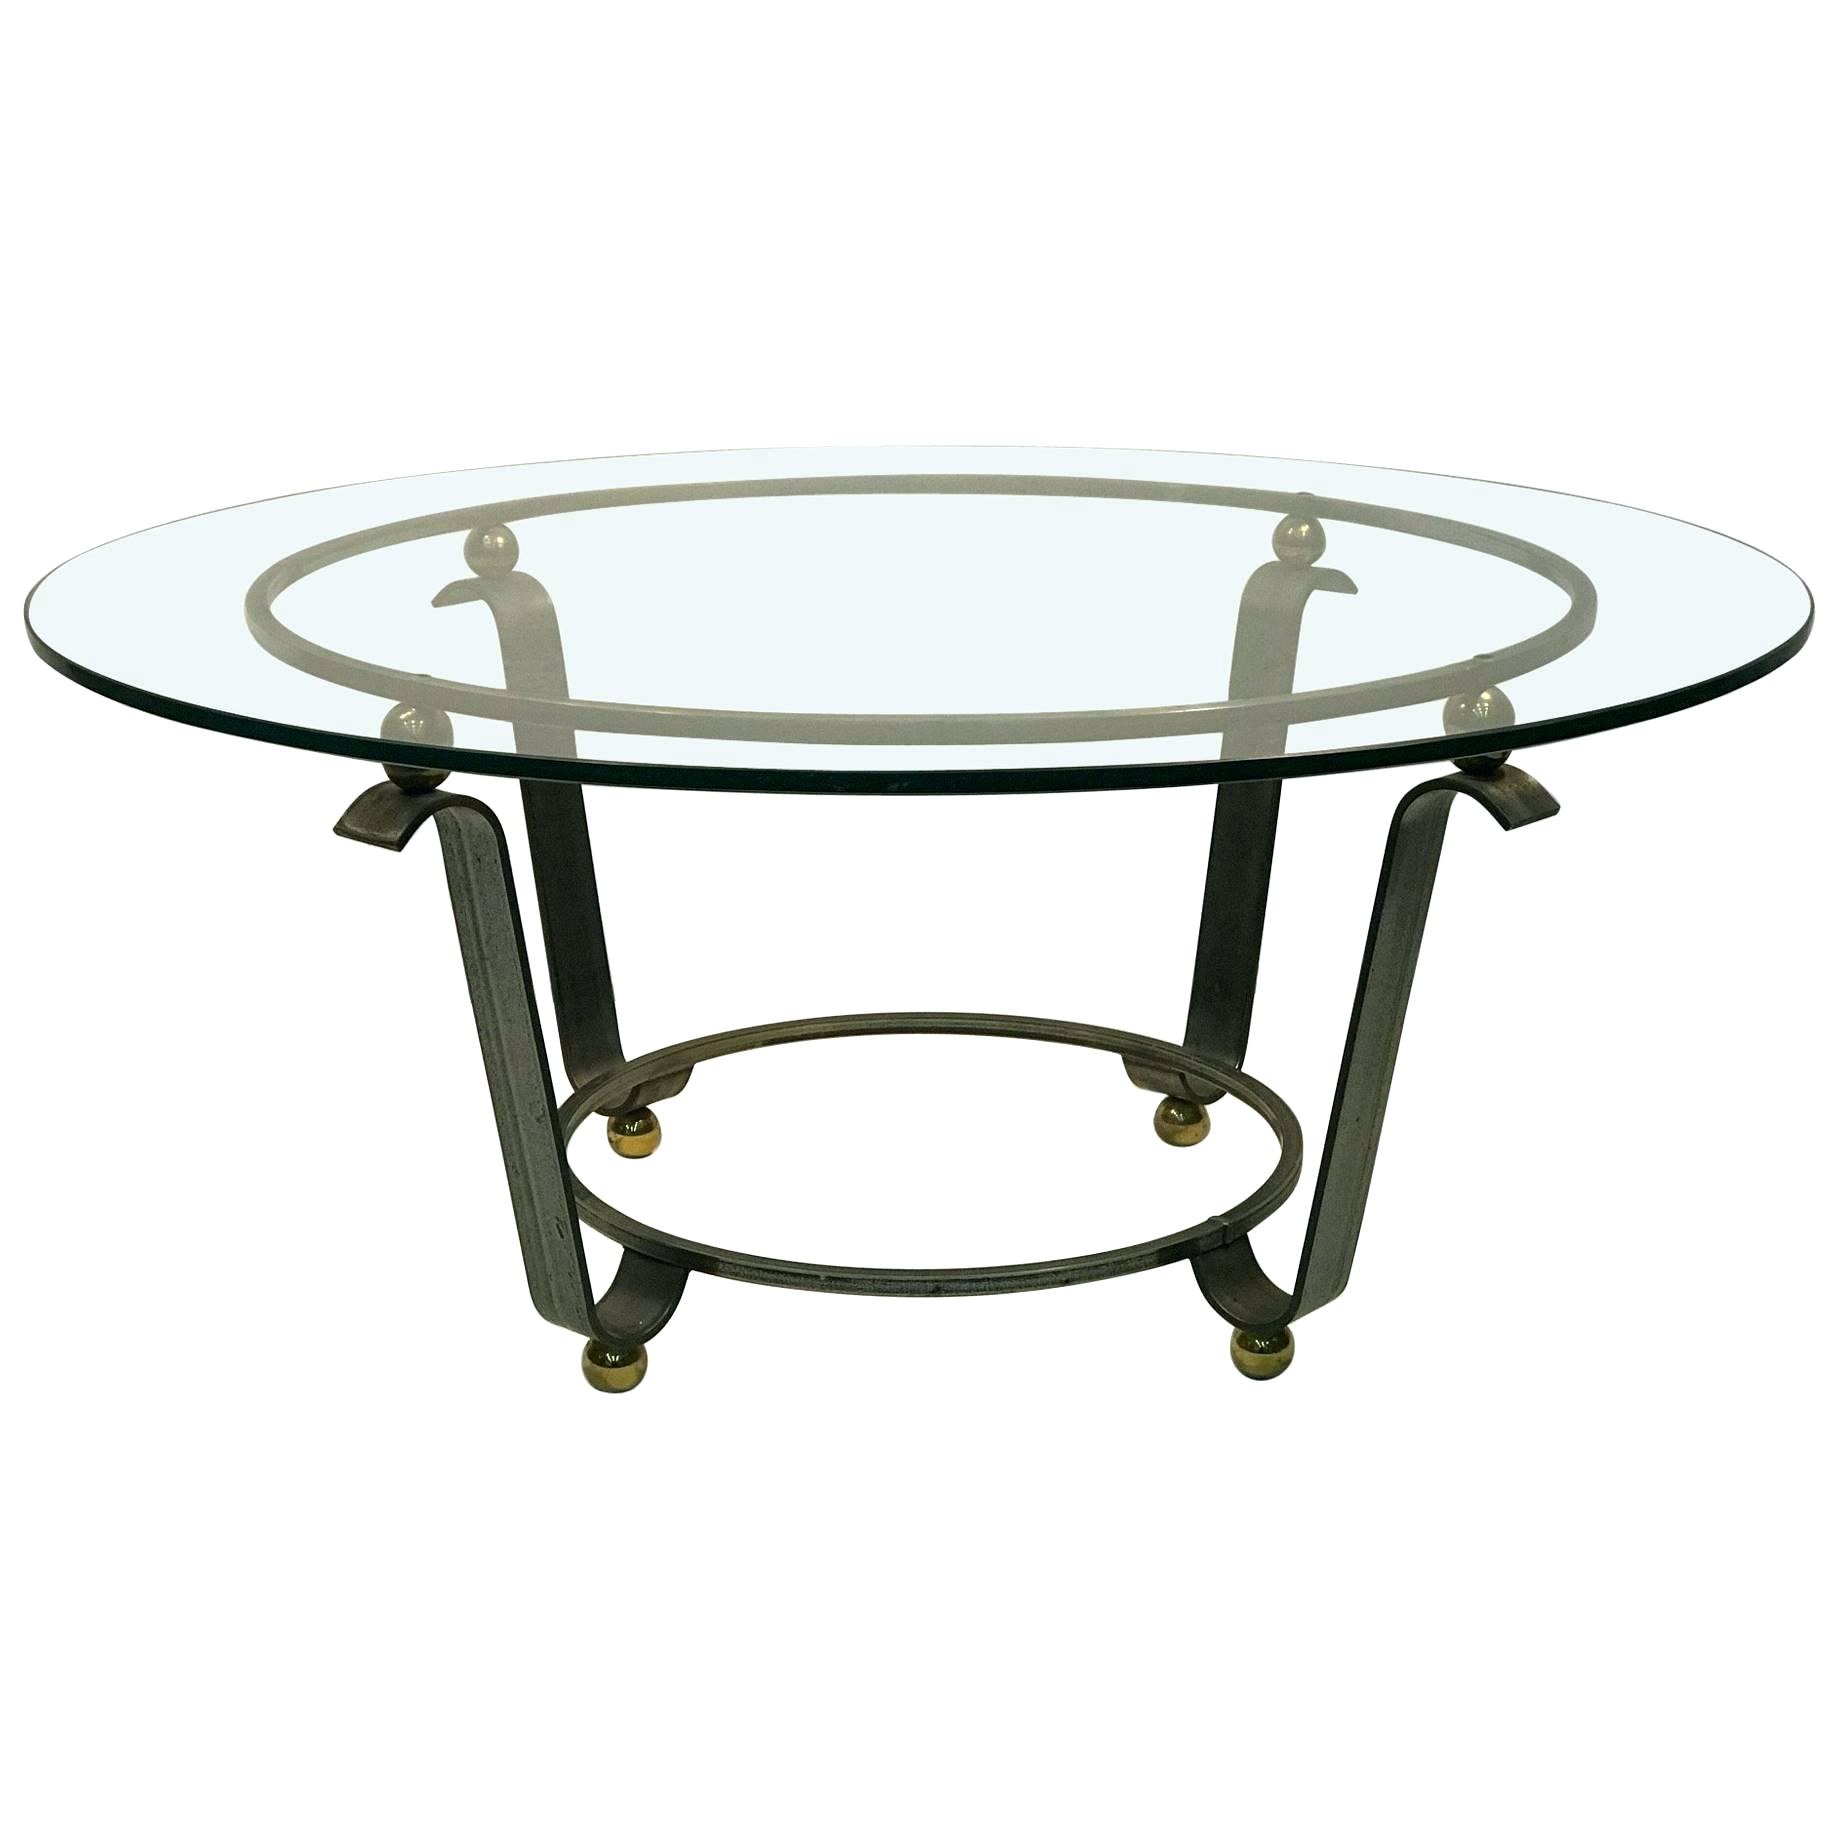 glass top accent tables round table with metal art coffee for small silver side drop leaf kitchen cane outdoor furniture lap desk target pool chairs bunnings cherry end living